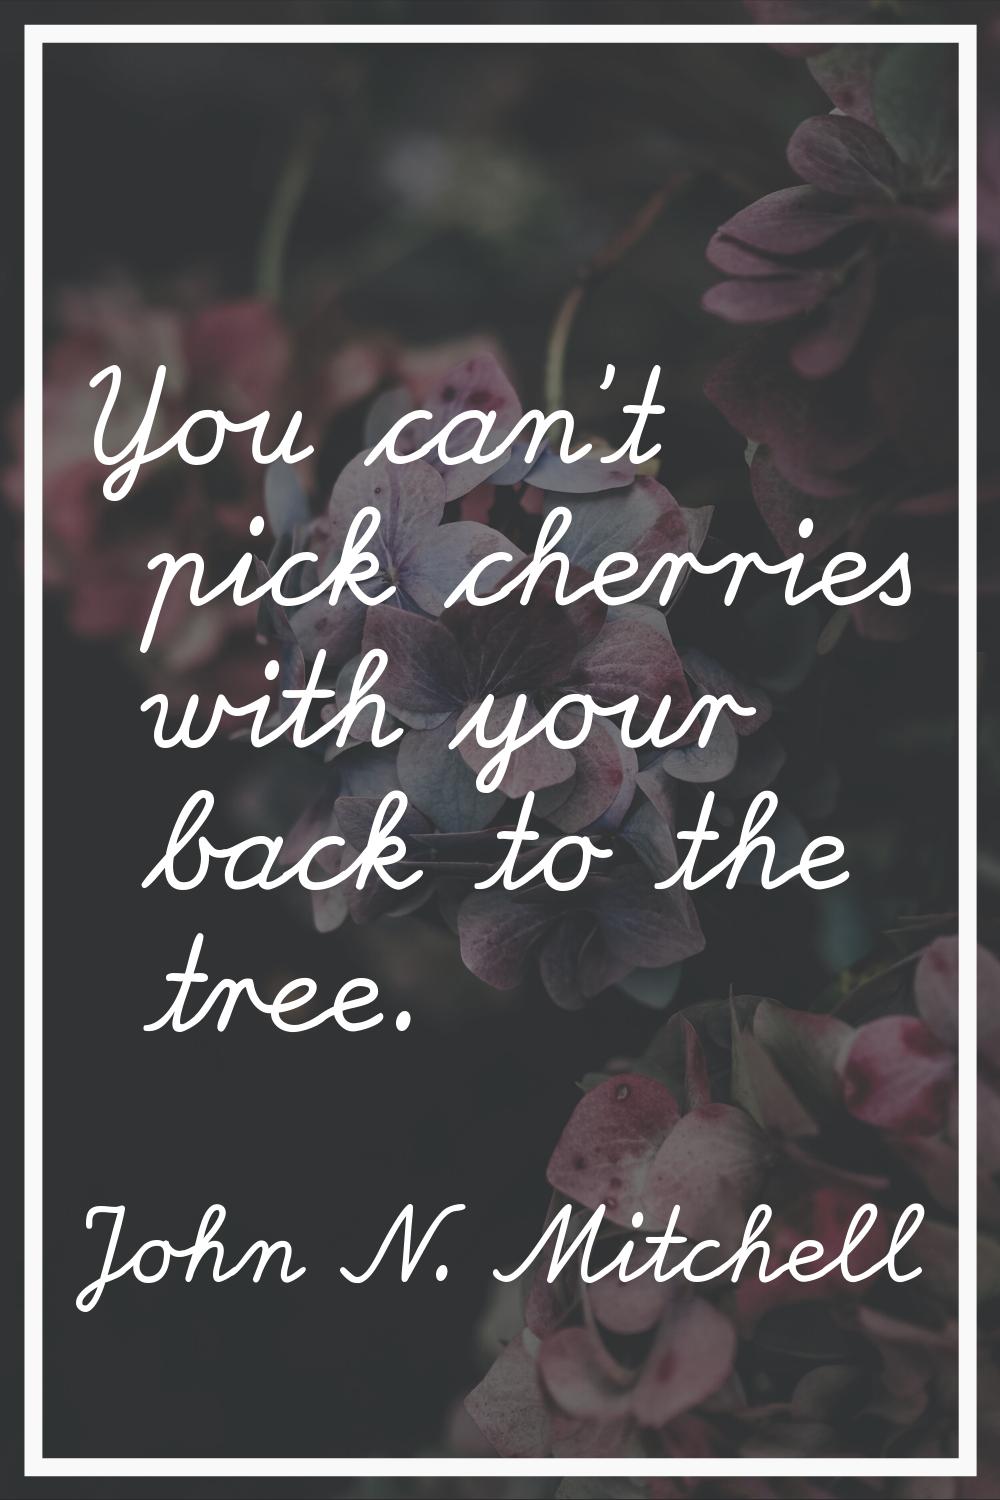 You can't pick cherries with your back to the tree.